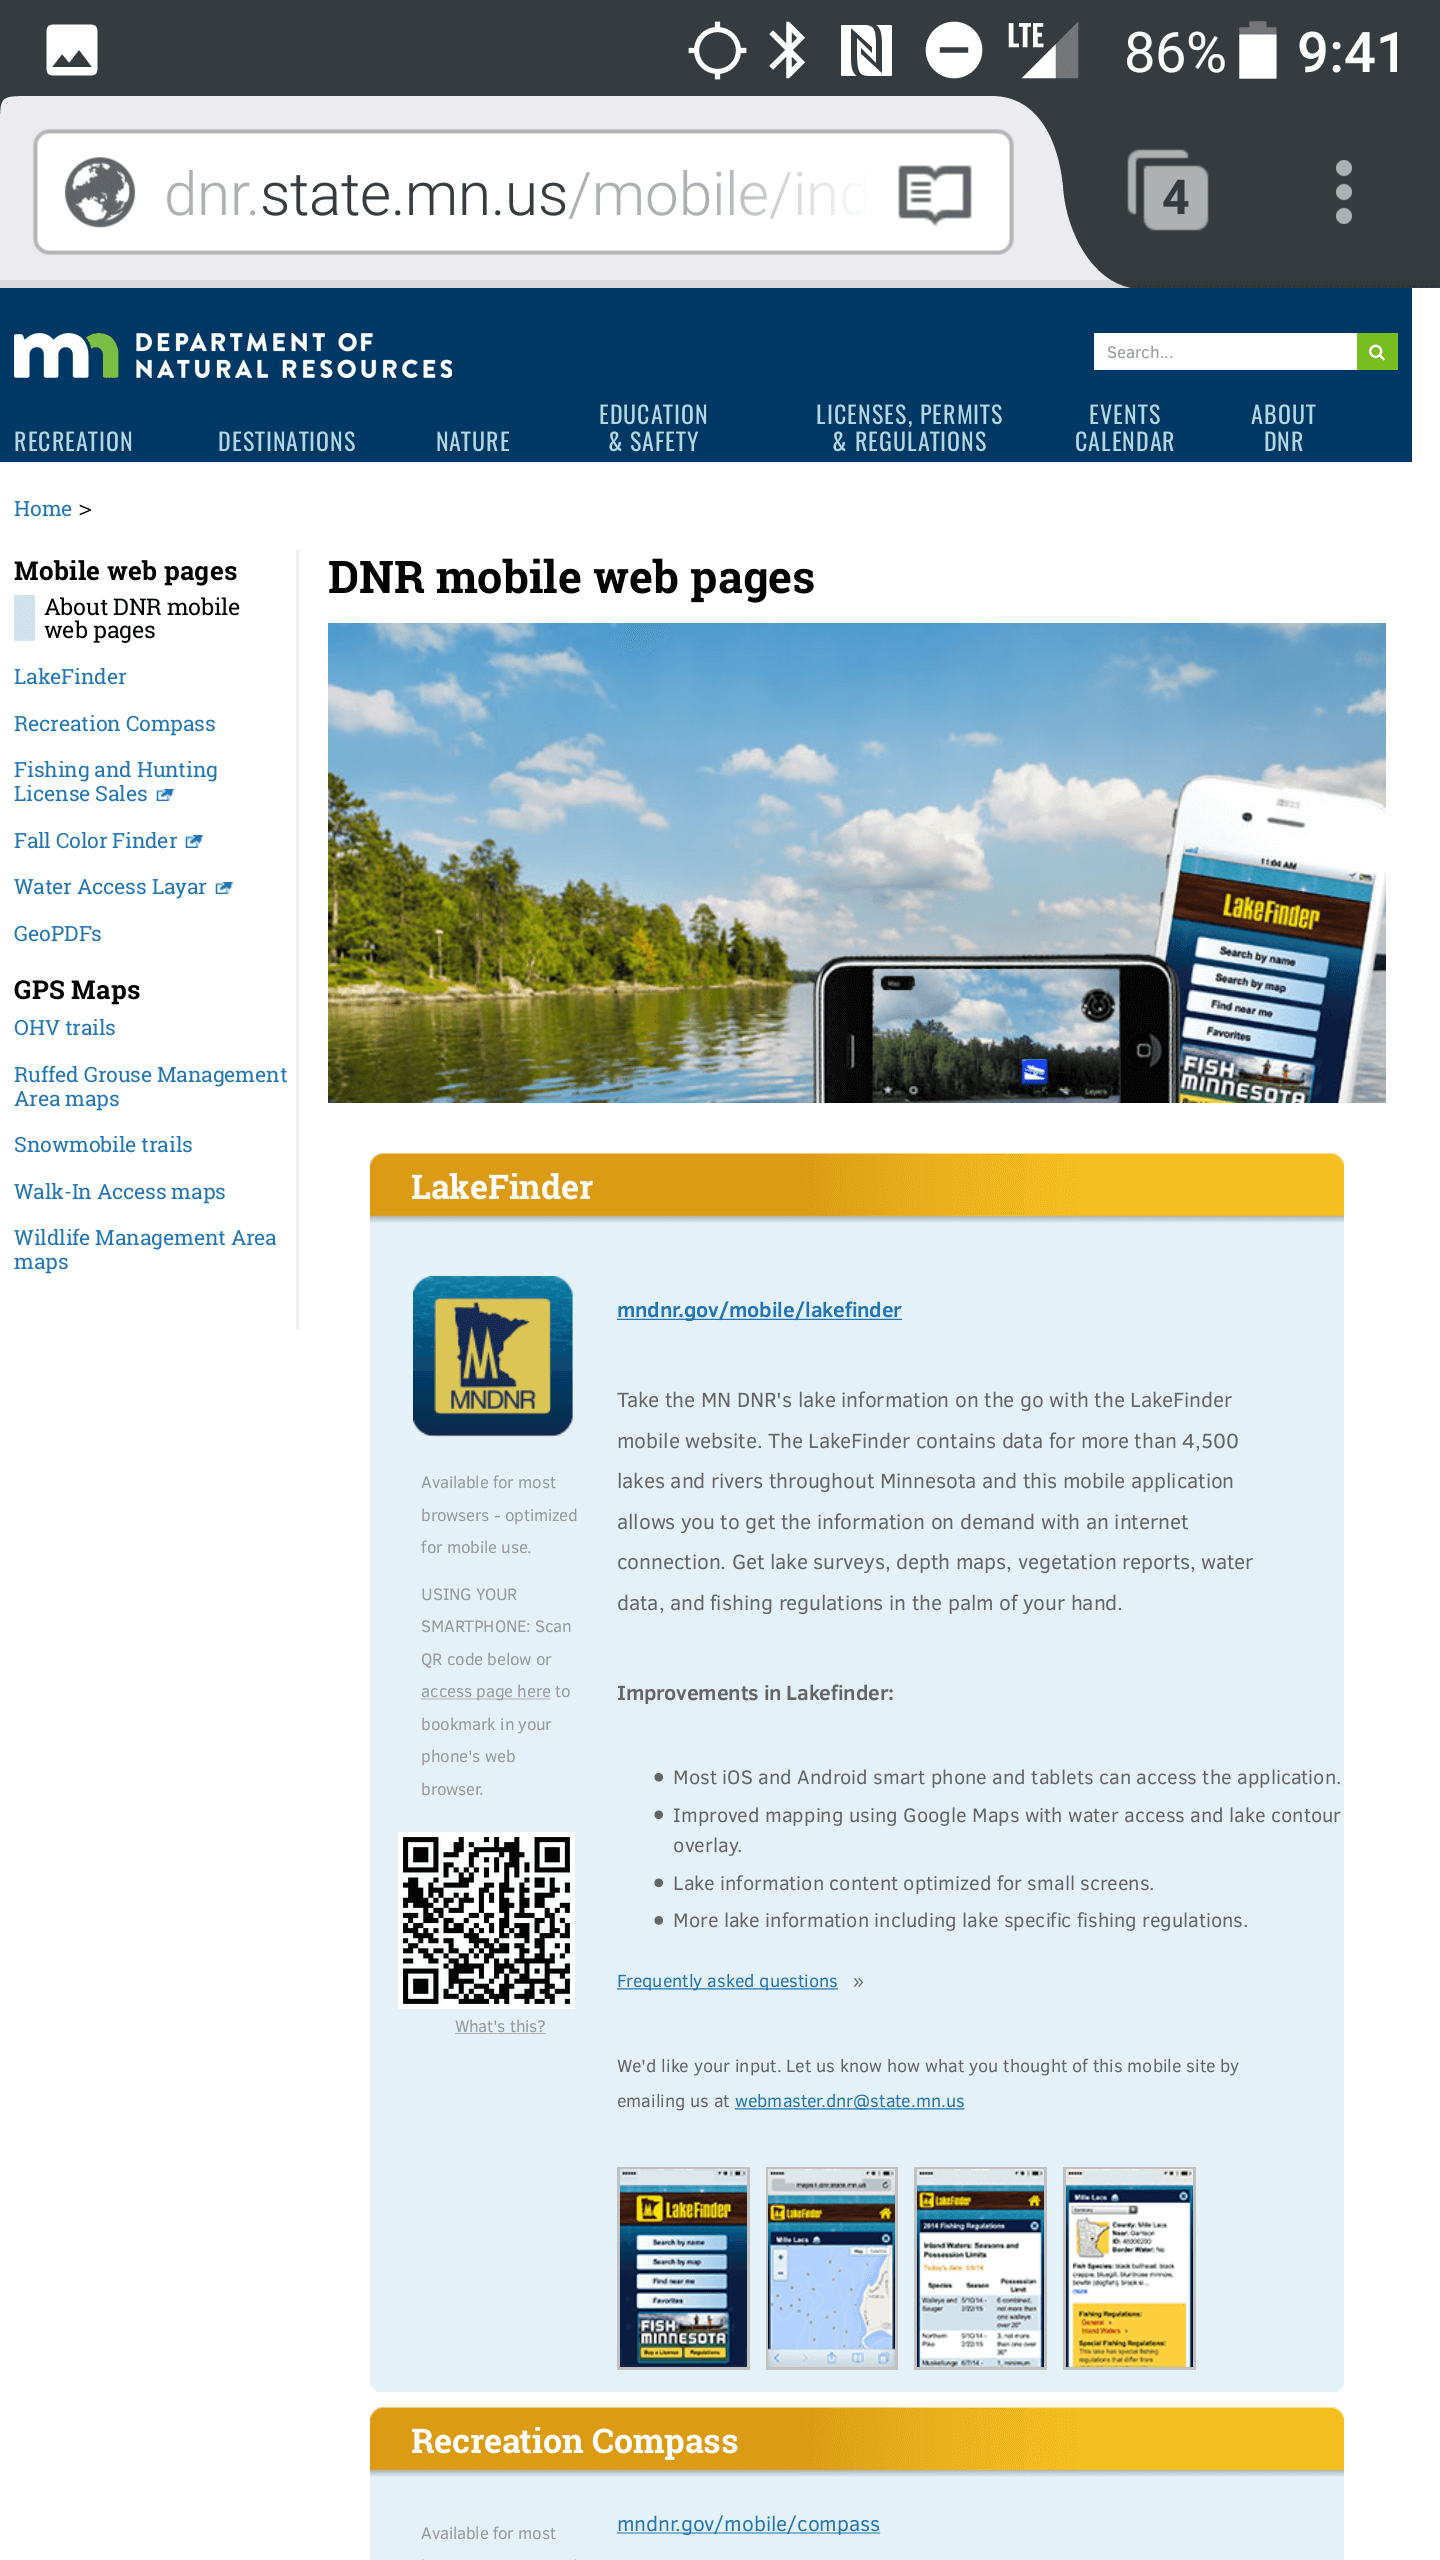 The DNR mobile web pages page